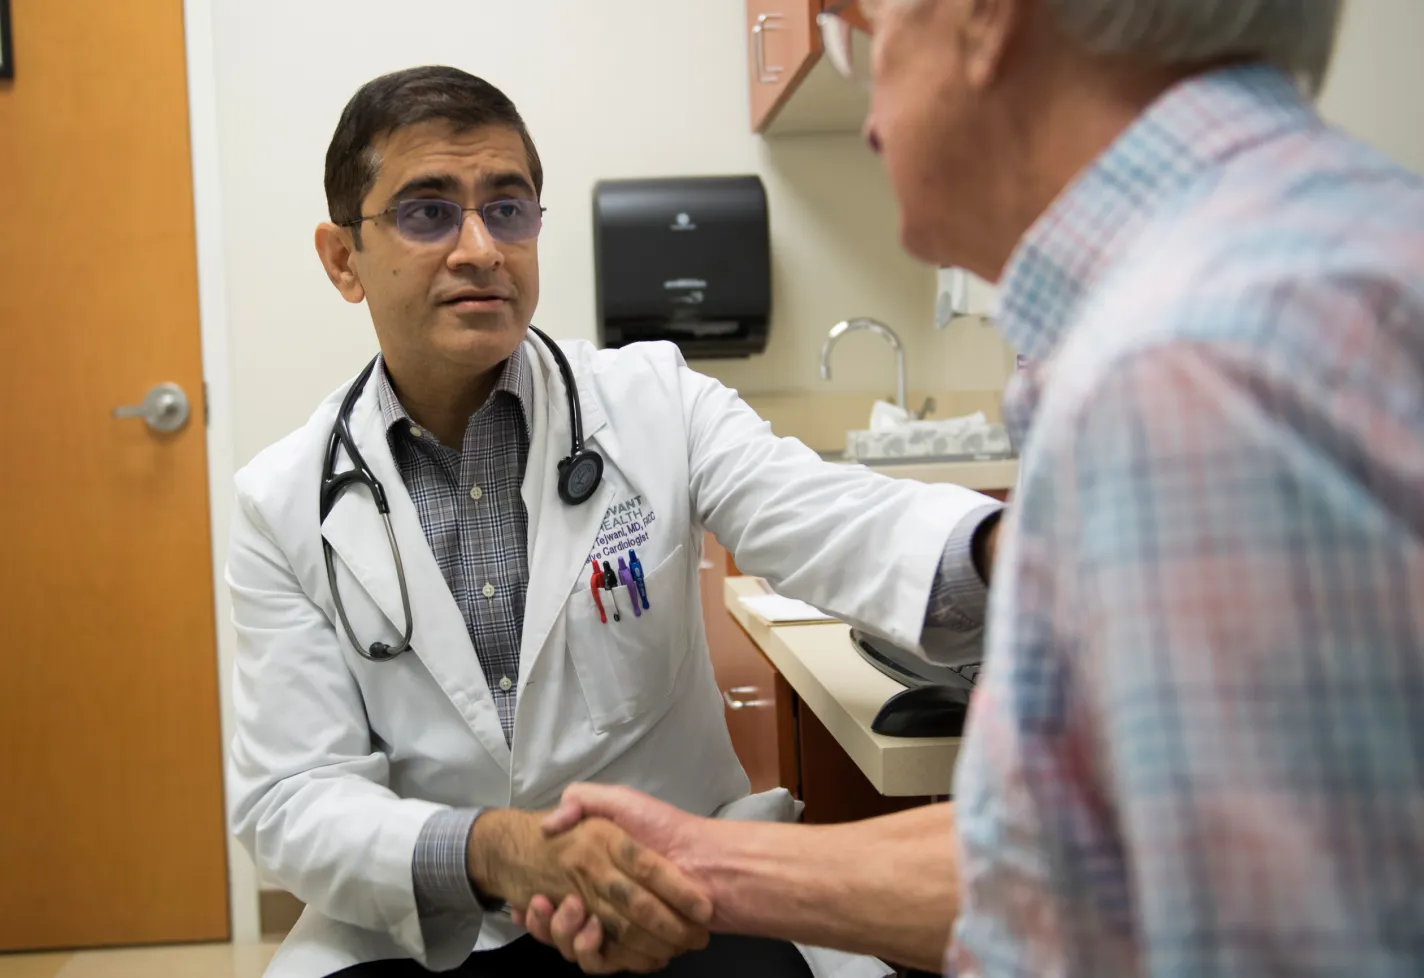 Dr. Tejwani is sitting across from a senior male patient in exam room. The two are shaking hands. 